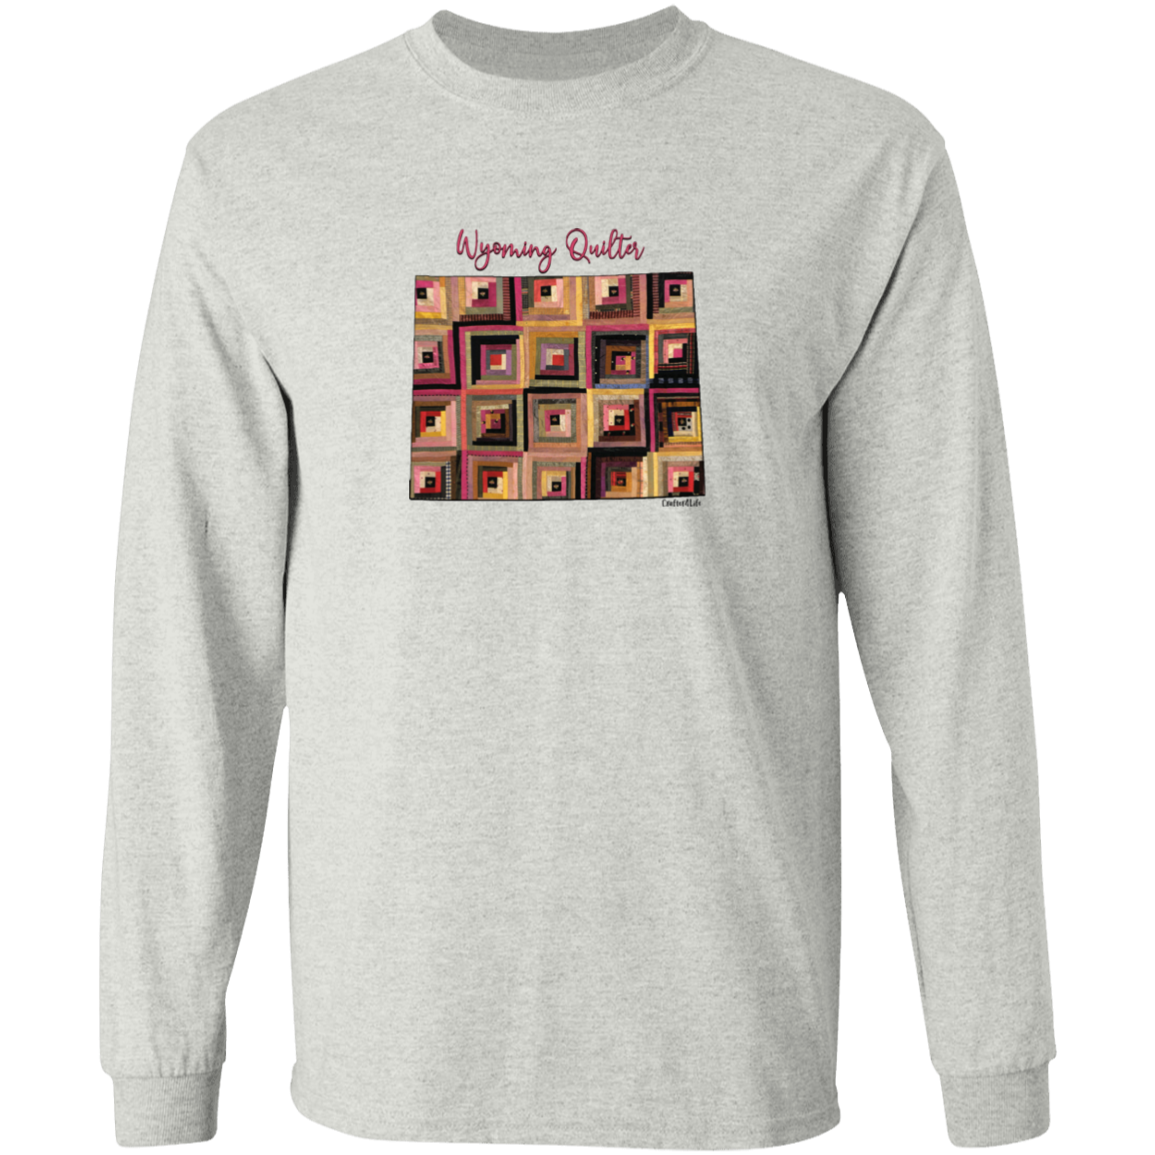 Wyoming Quilter Long Sleeve T-Shirt, Gift for Quilting Friends and Family